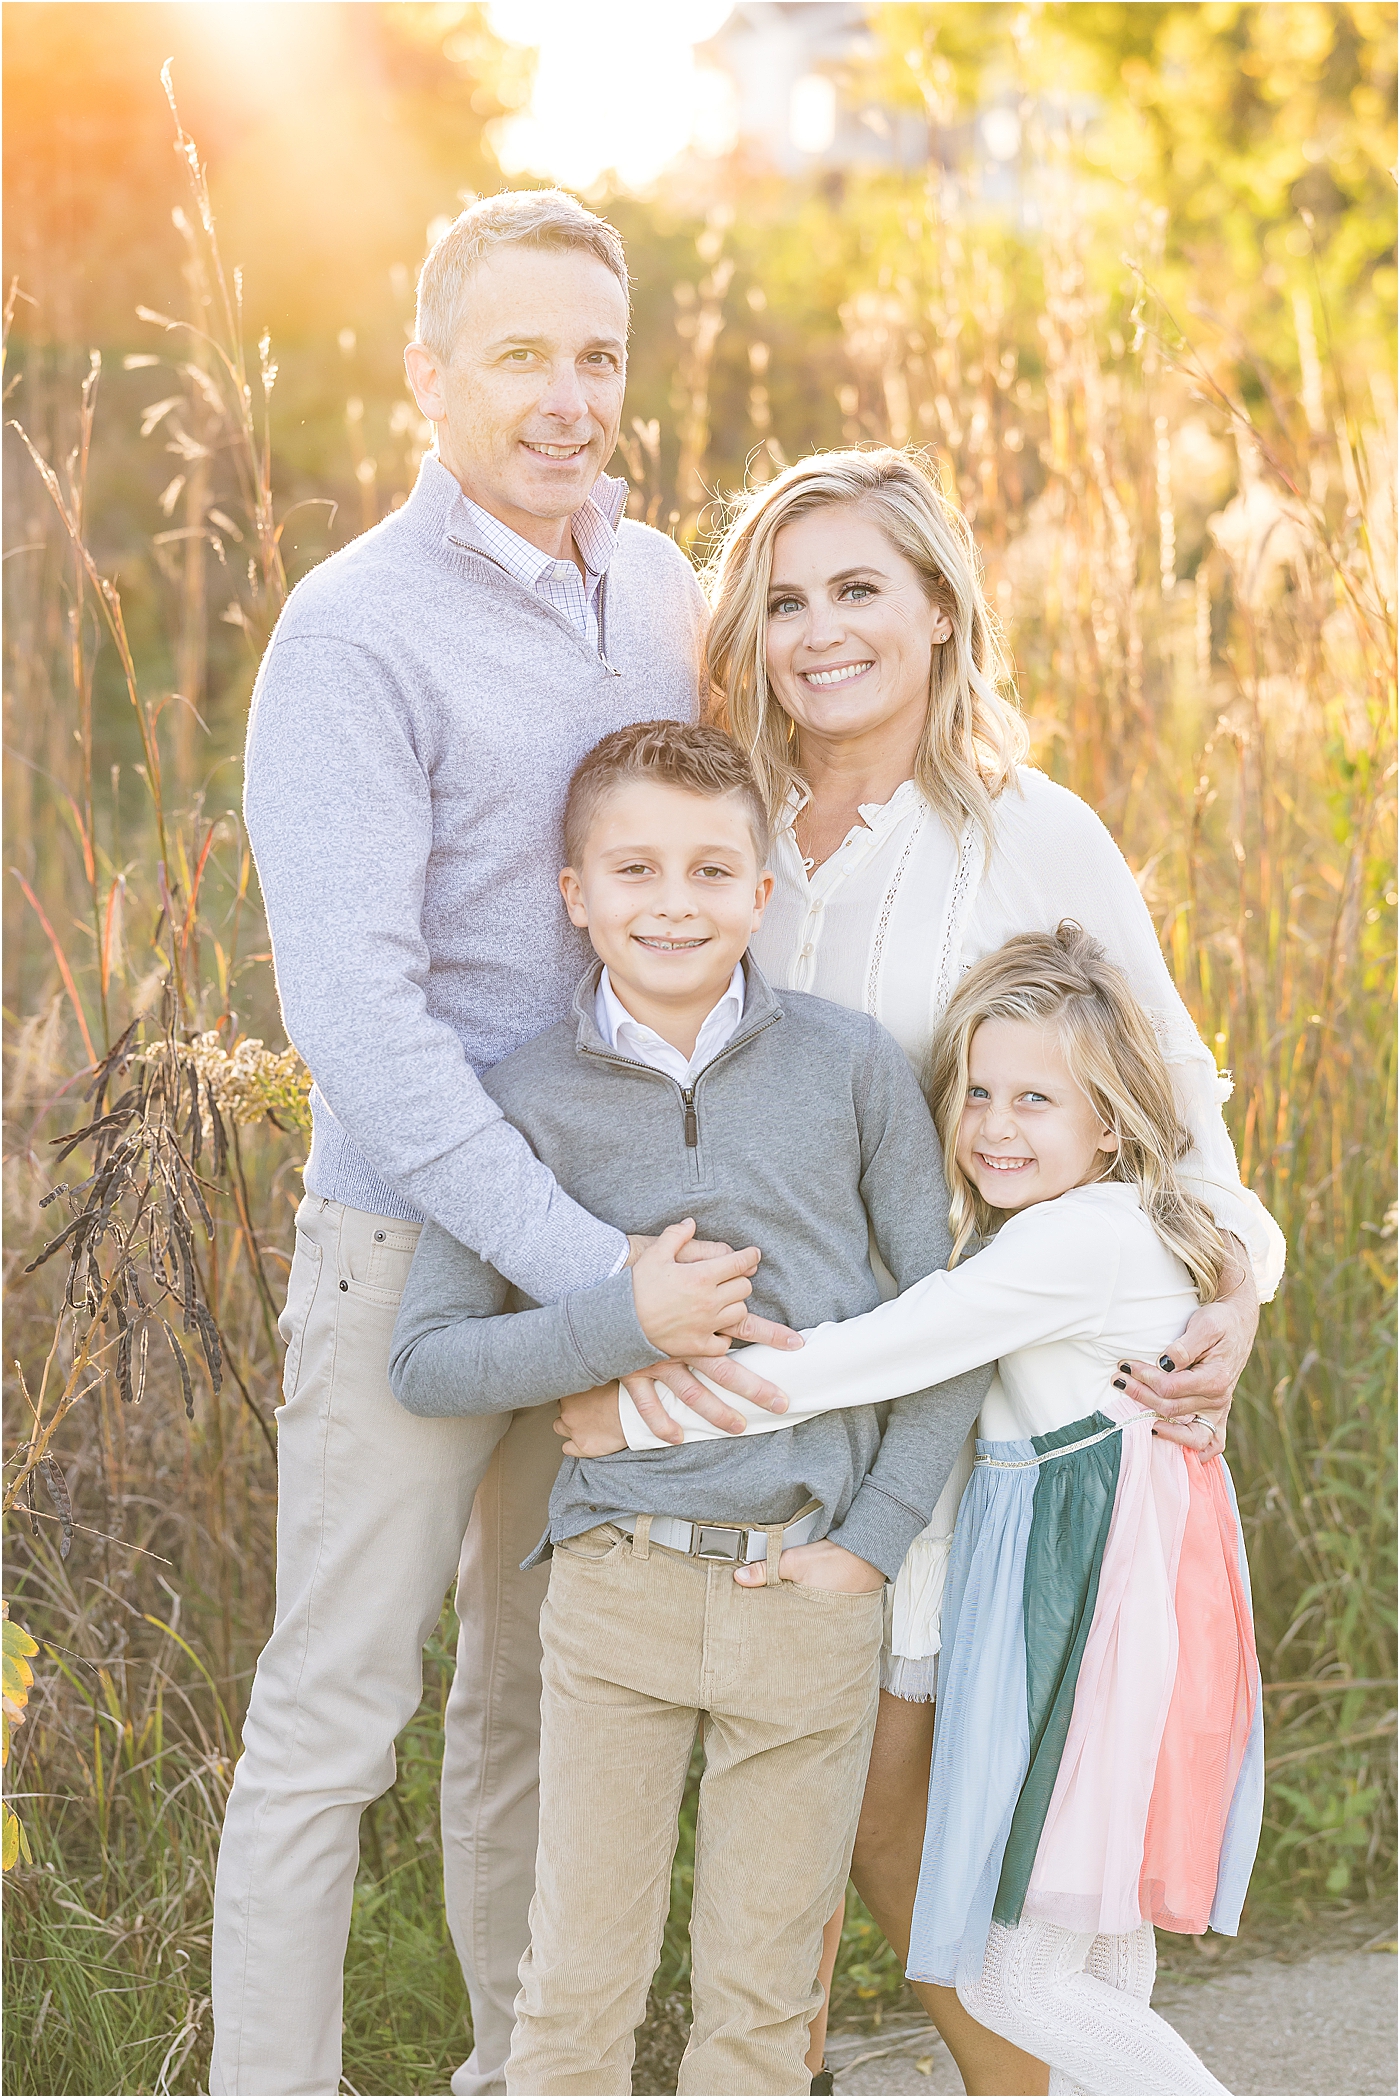 Sunset family photoshoot at The Village of West Clay | Lindsay Konopa Photography